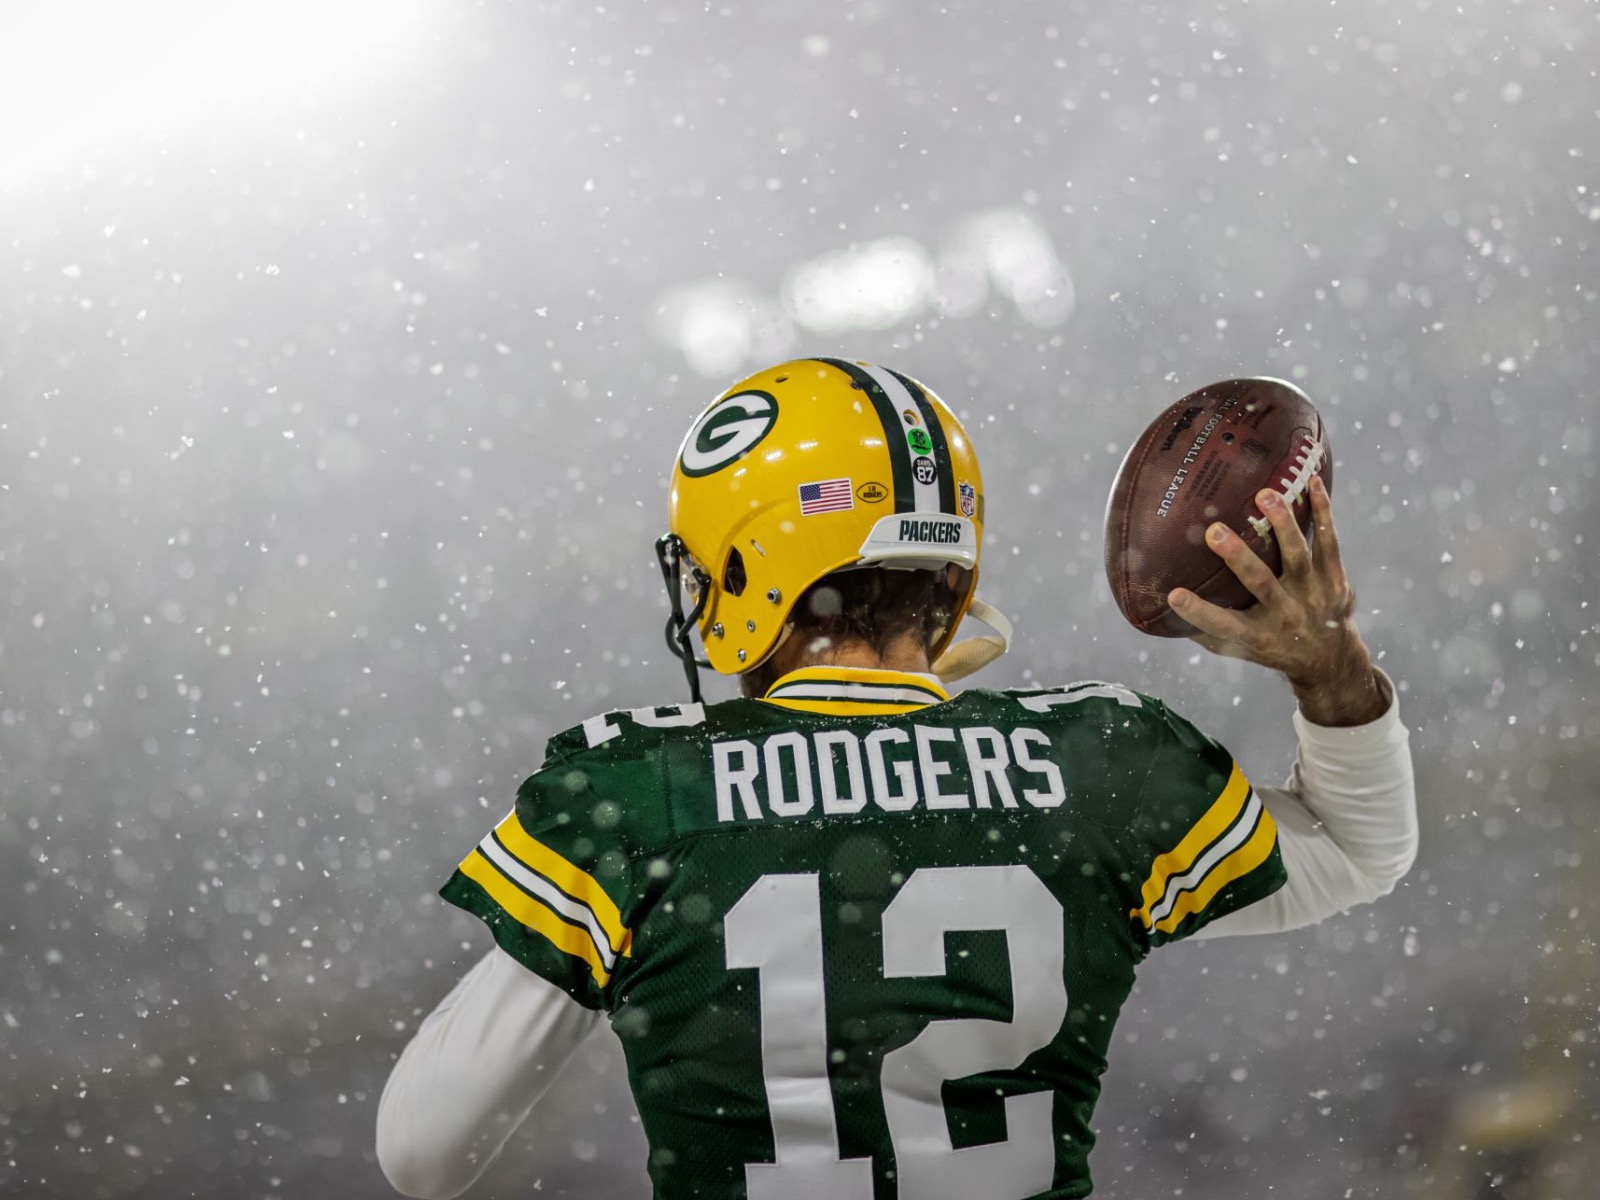 Aaron Rodgers throwing in snow